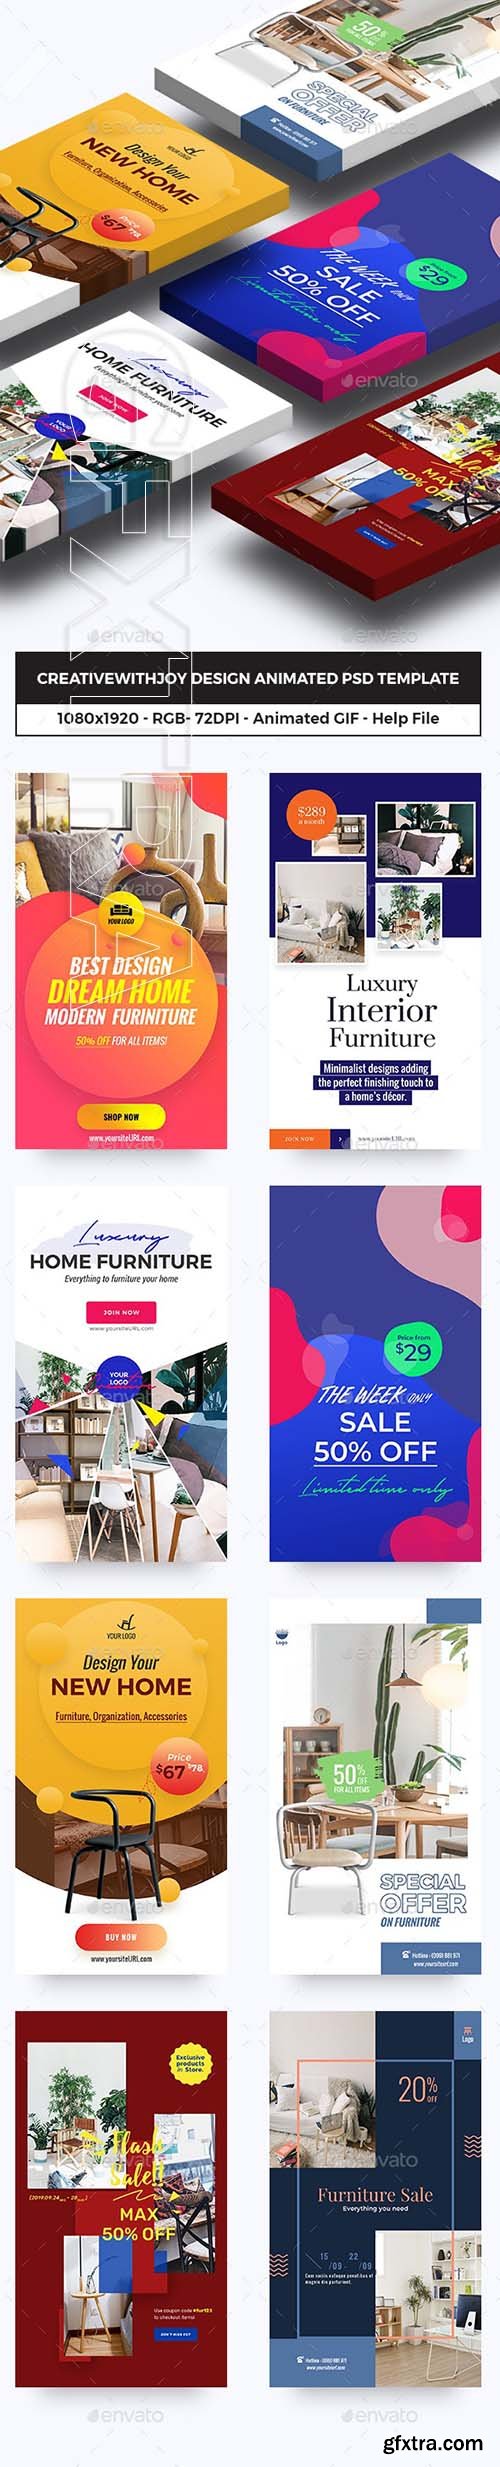 GraphicRiver - Furniture, Decor Animated GIFs Instagram Stories